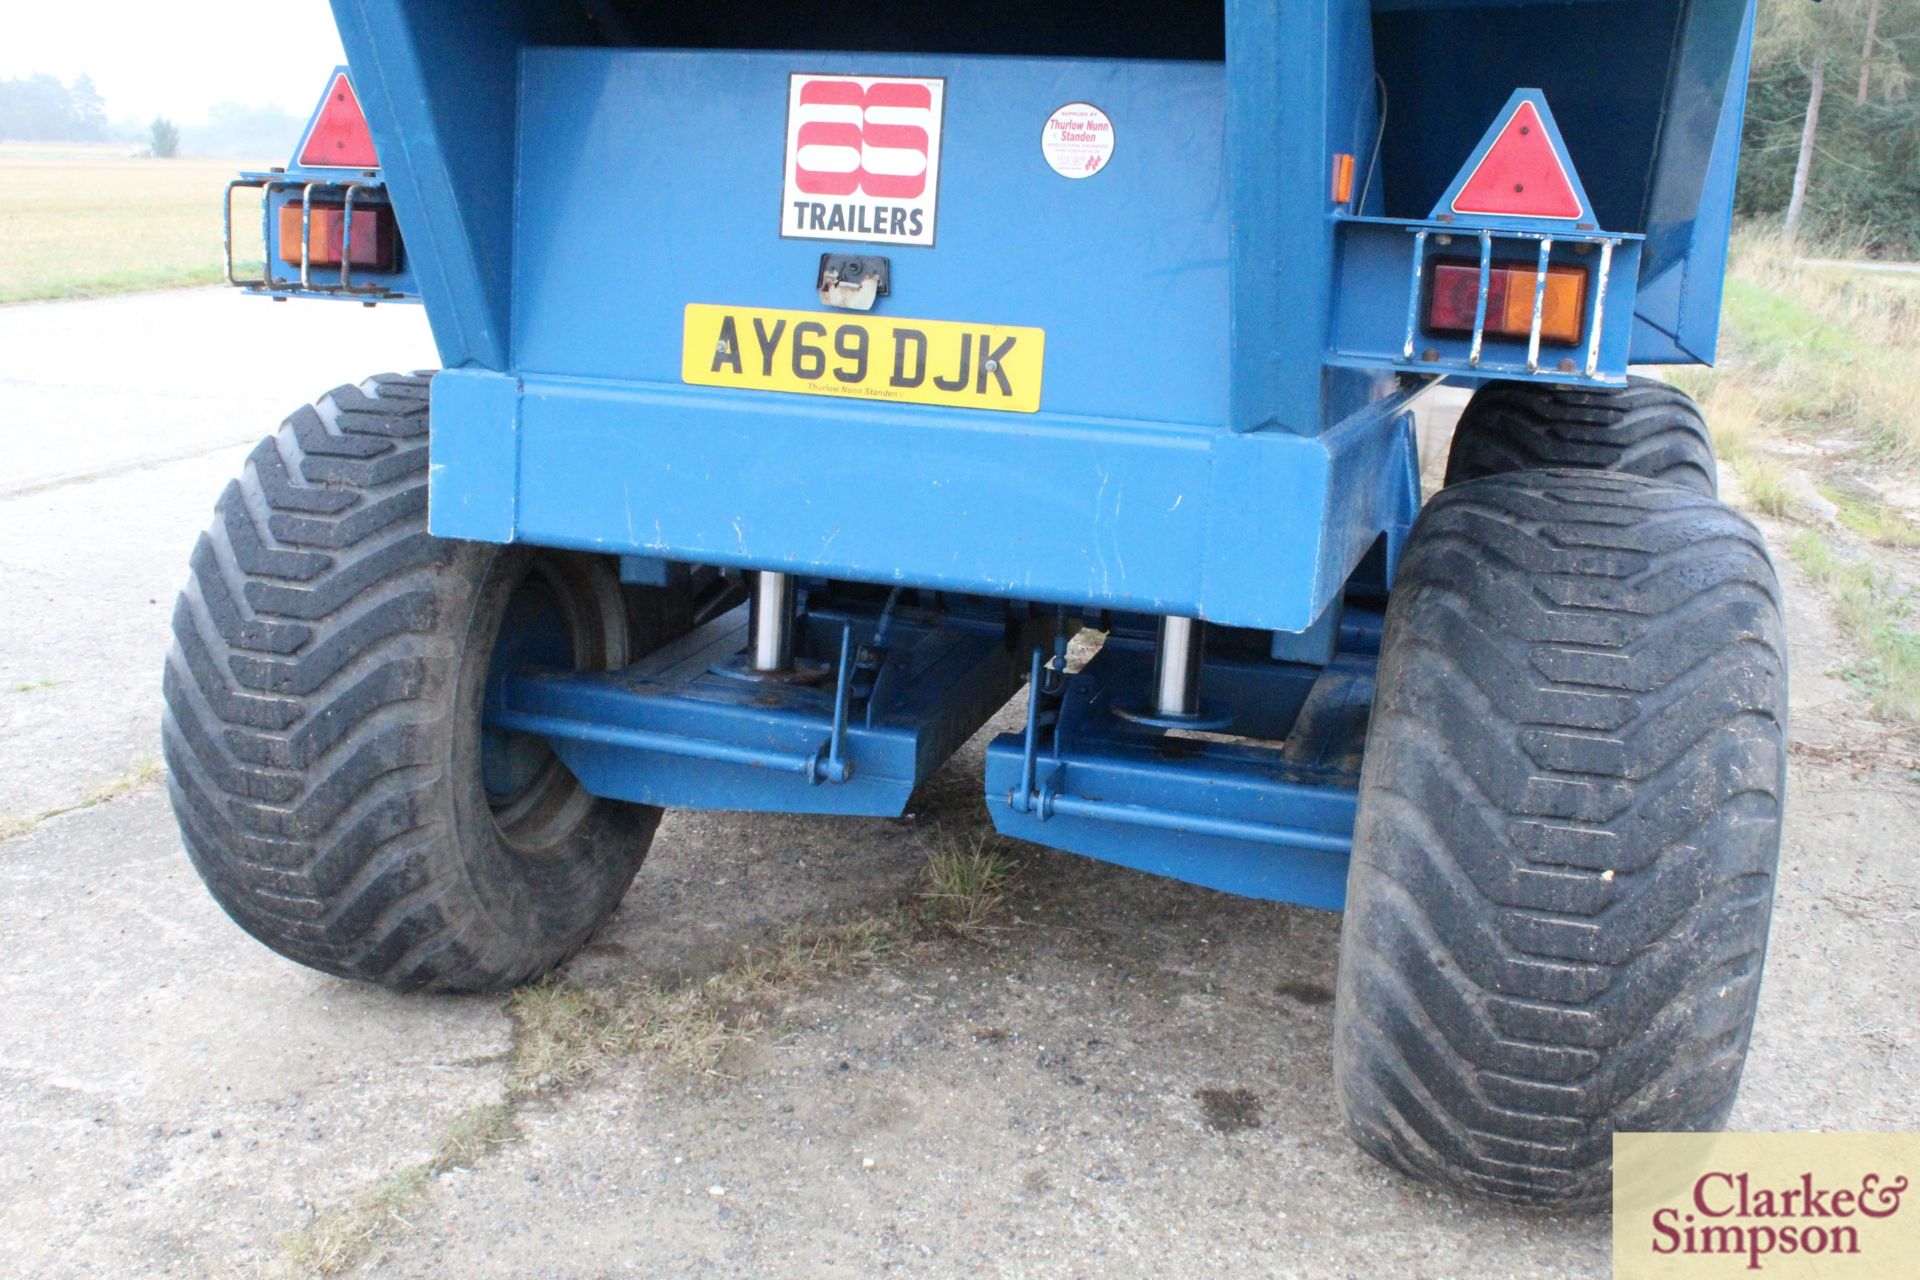 AS Marston ACE14D 14T twin axle dump trailer. 03/2011. Serial number 217341. With oil brakes, - Image 19 of 26